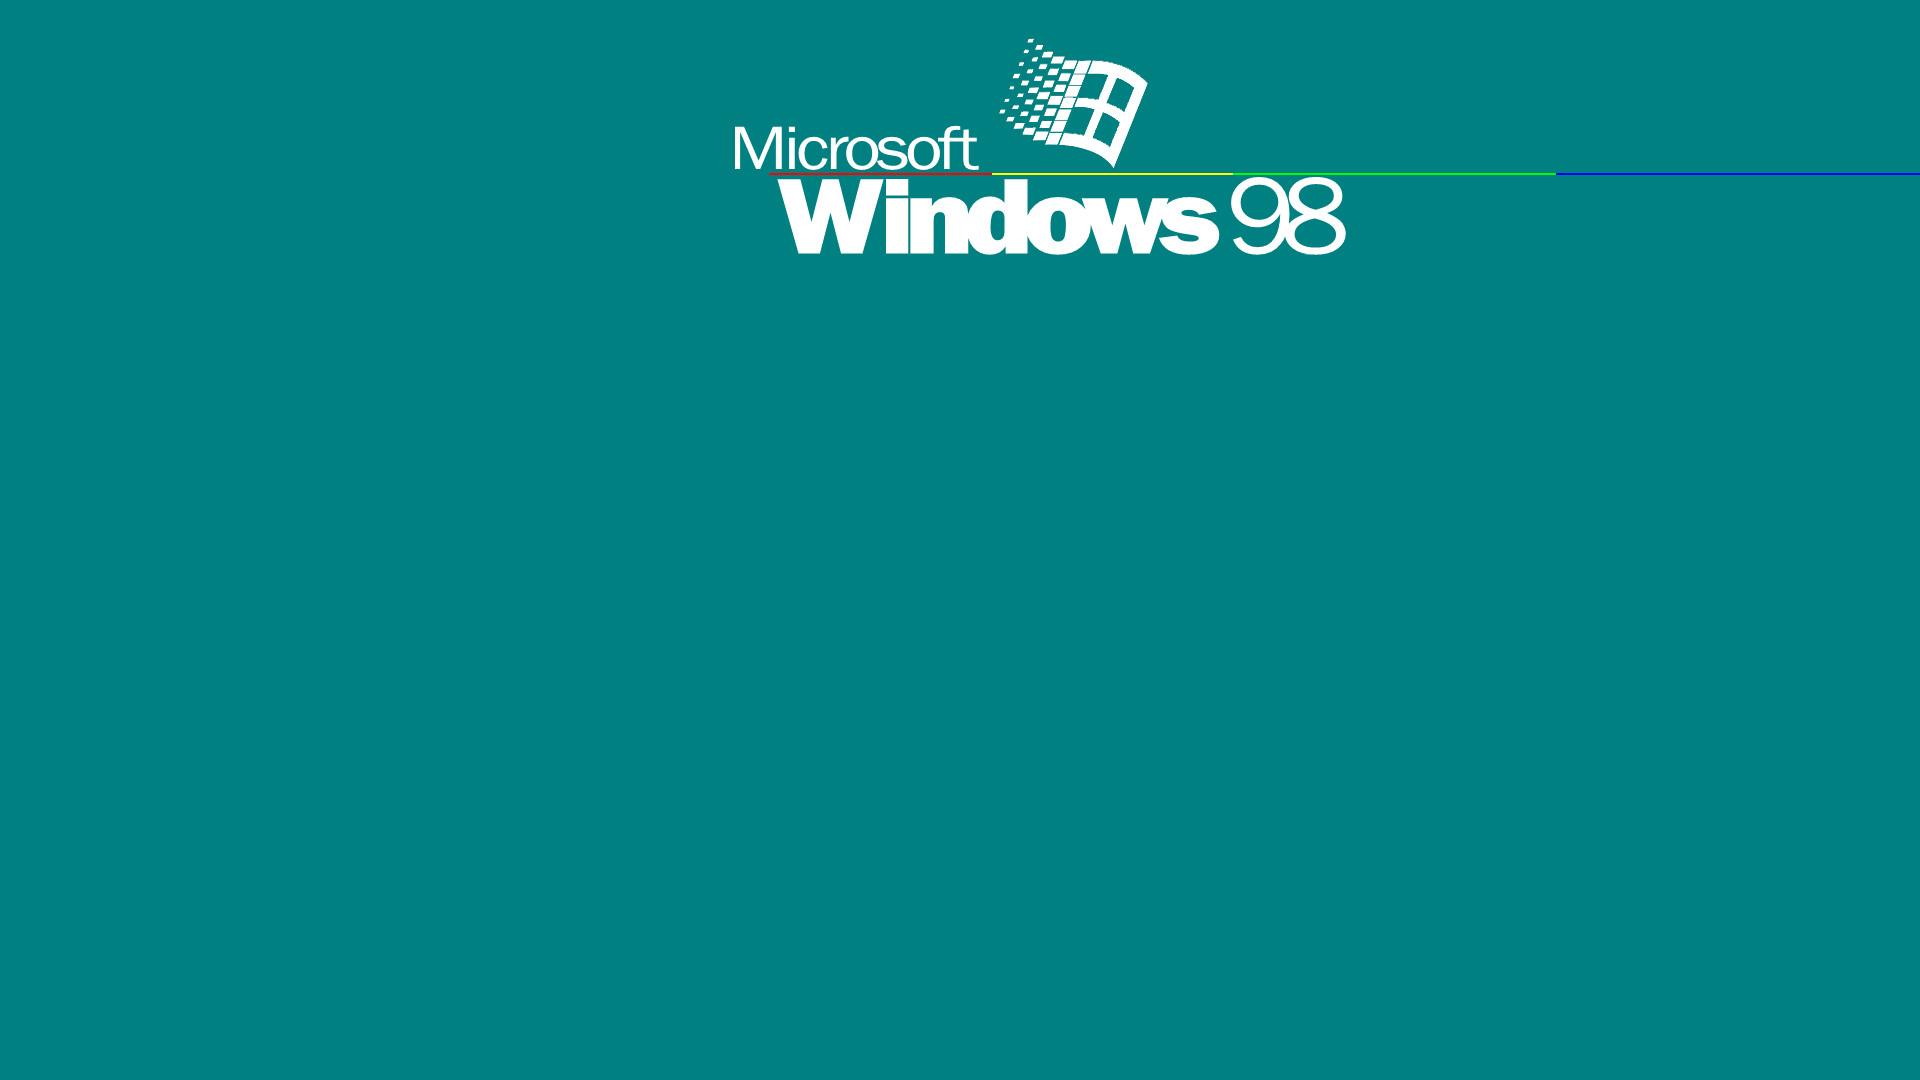 1920x1080 Wallpapers For > Windows 98 Wallpaper